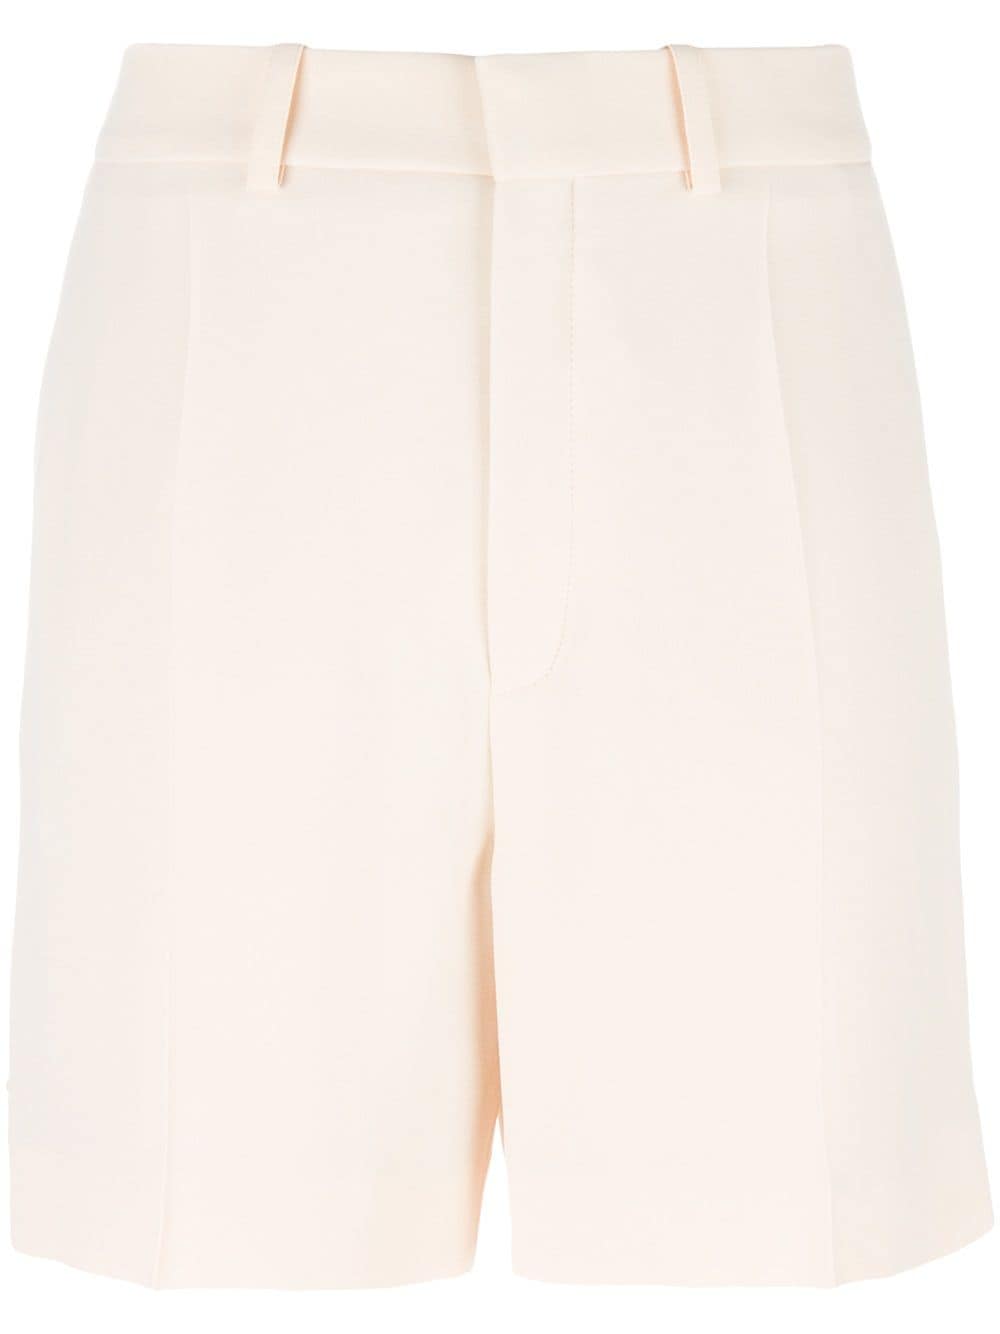 Chloé Embroidered Trim Tailored Shorts - Farfetch